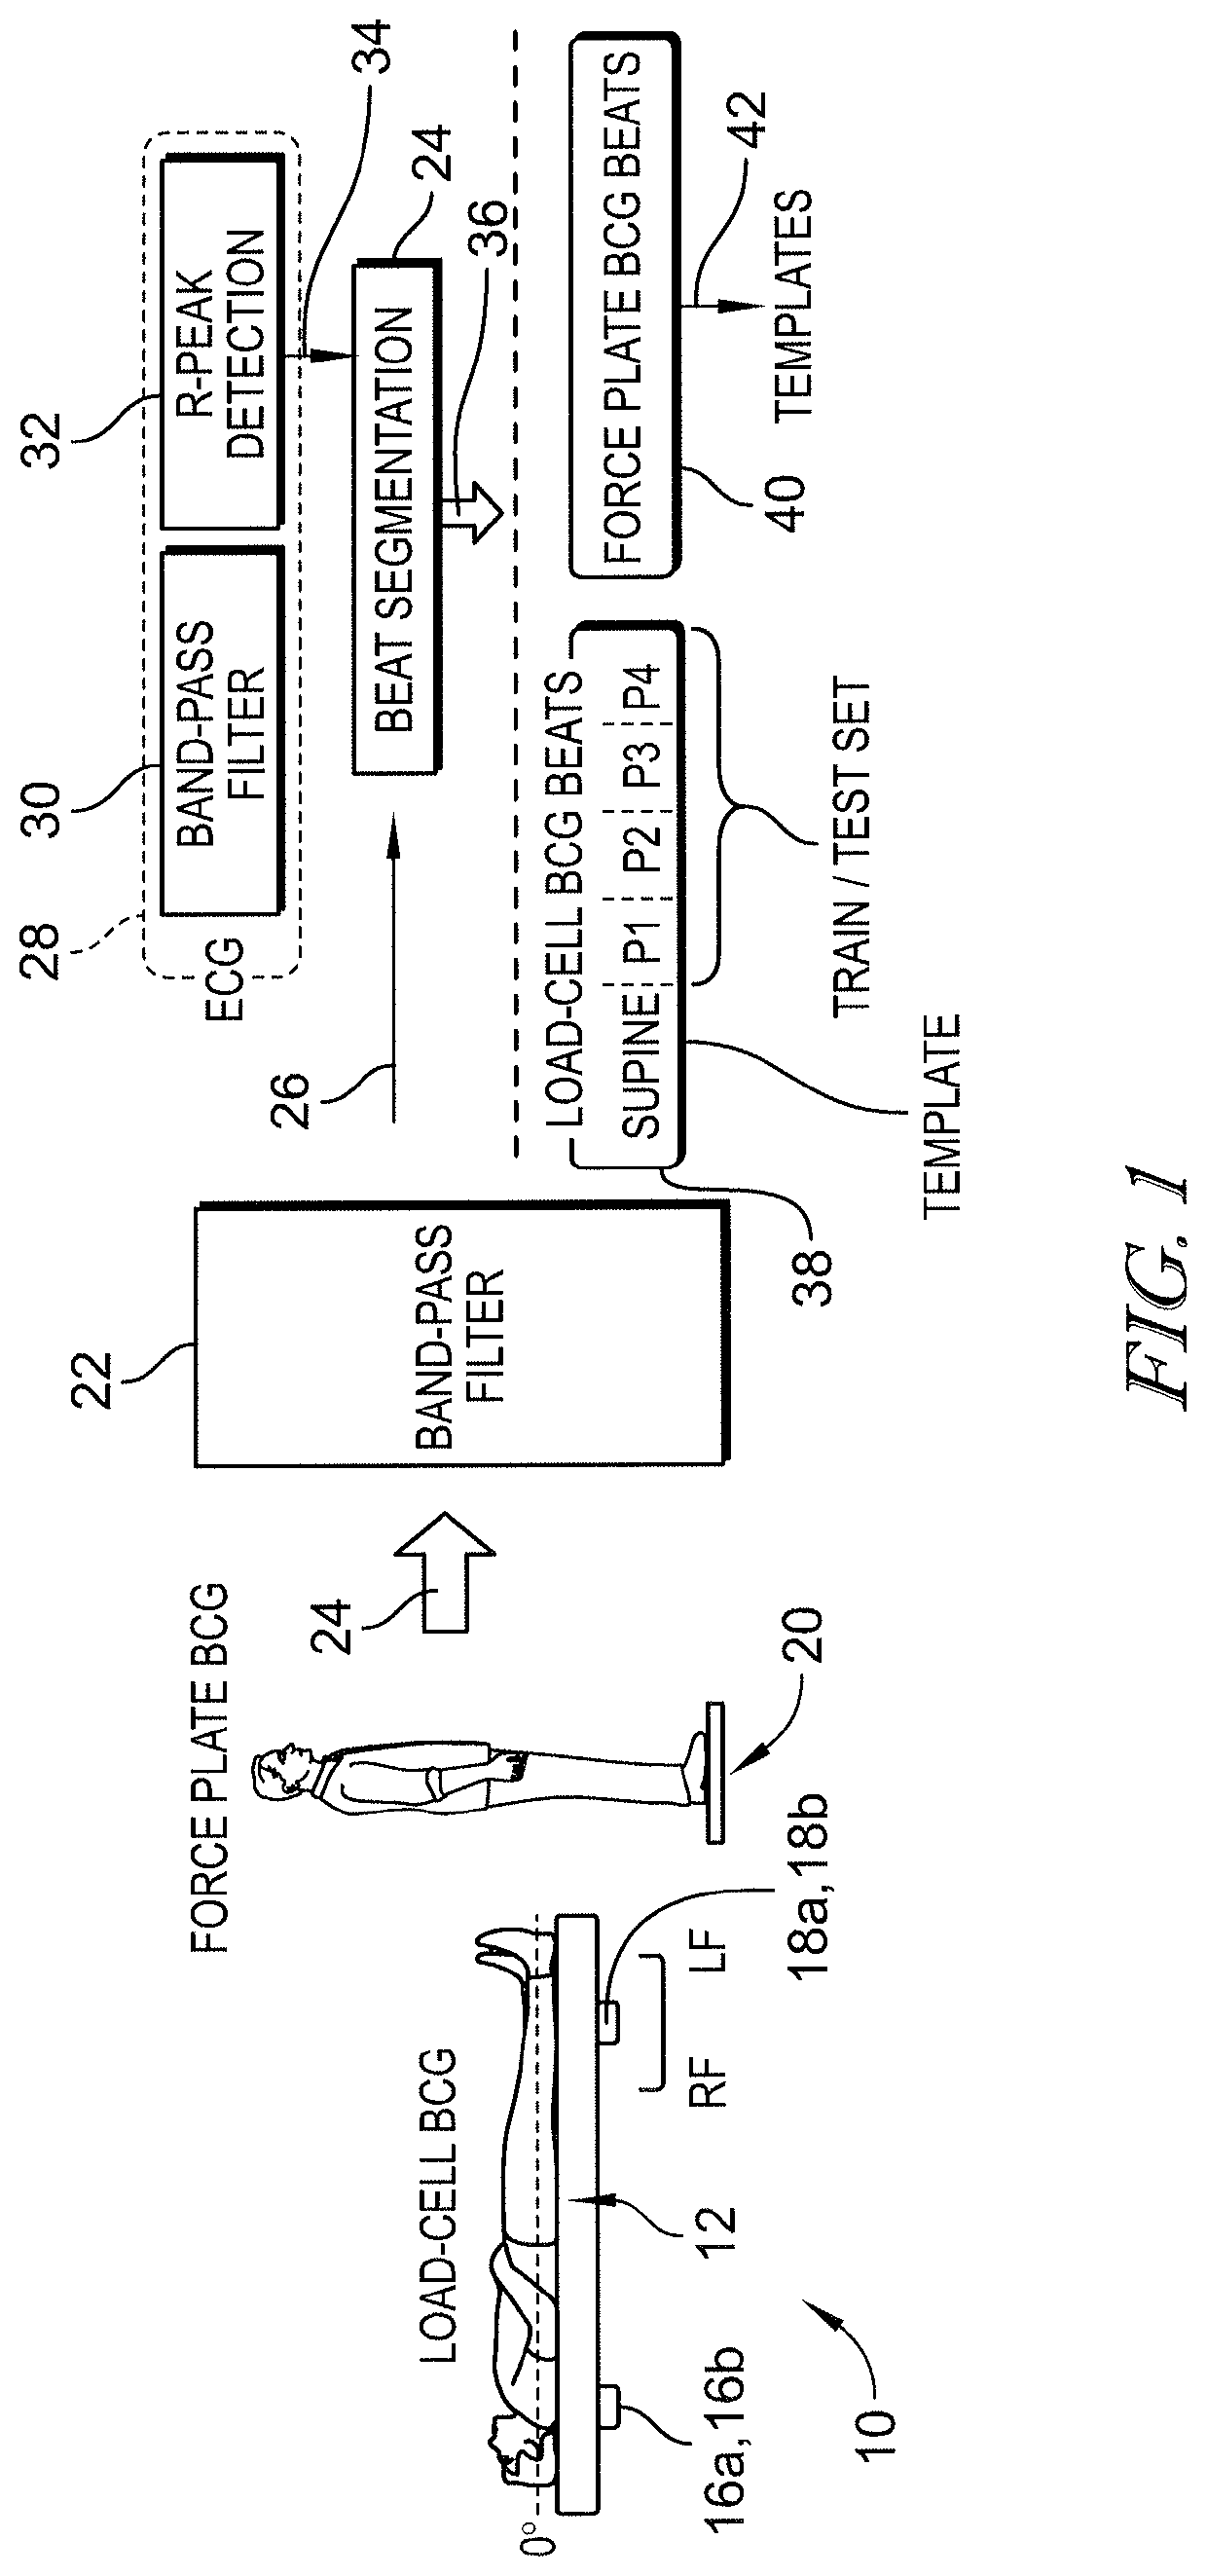 Bed-based ballistocardiogram apparatus and method